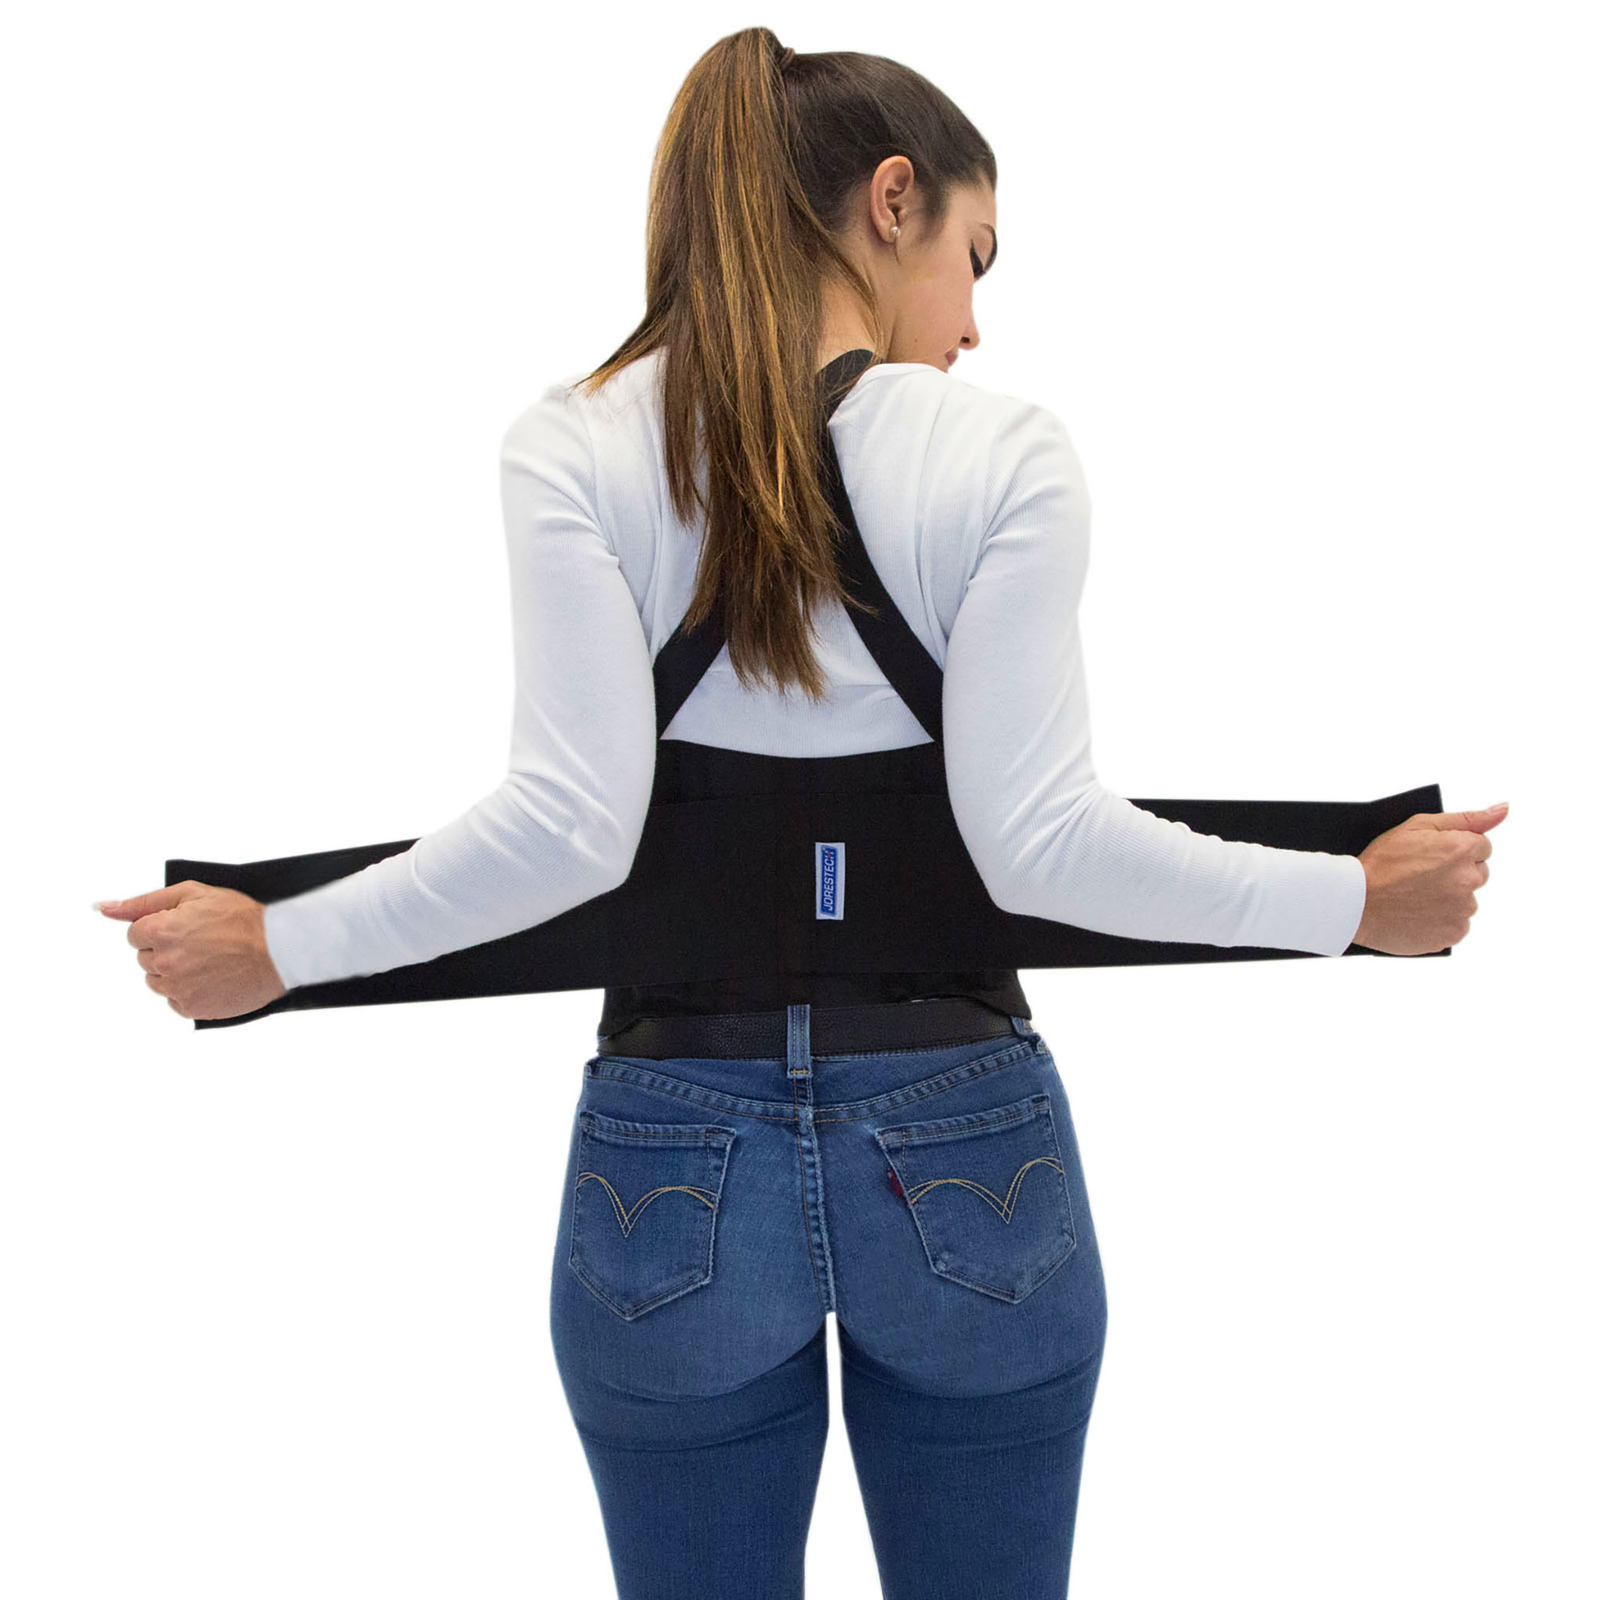 Lower Back Brace with Suspenders, Lumbar Support, Wrap for Posture  Recovery, Workout, Herniated Disc Pain Relief, Waist Trimmer Work Ab Belt, Industrial, Adjustable, Women & Men